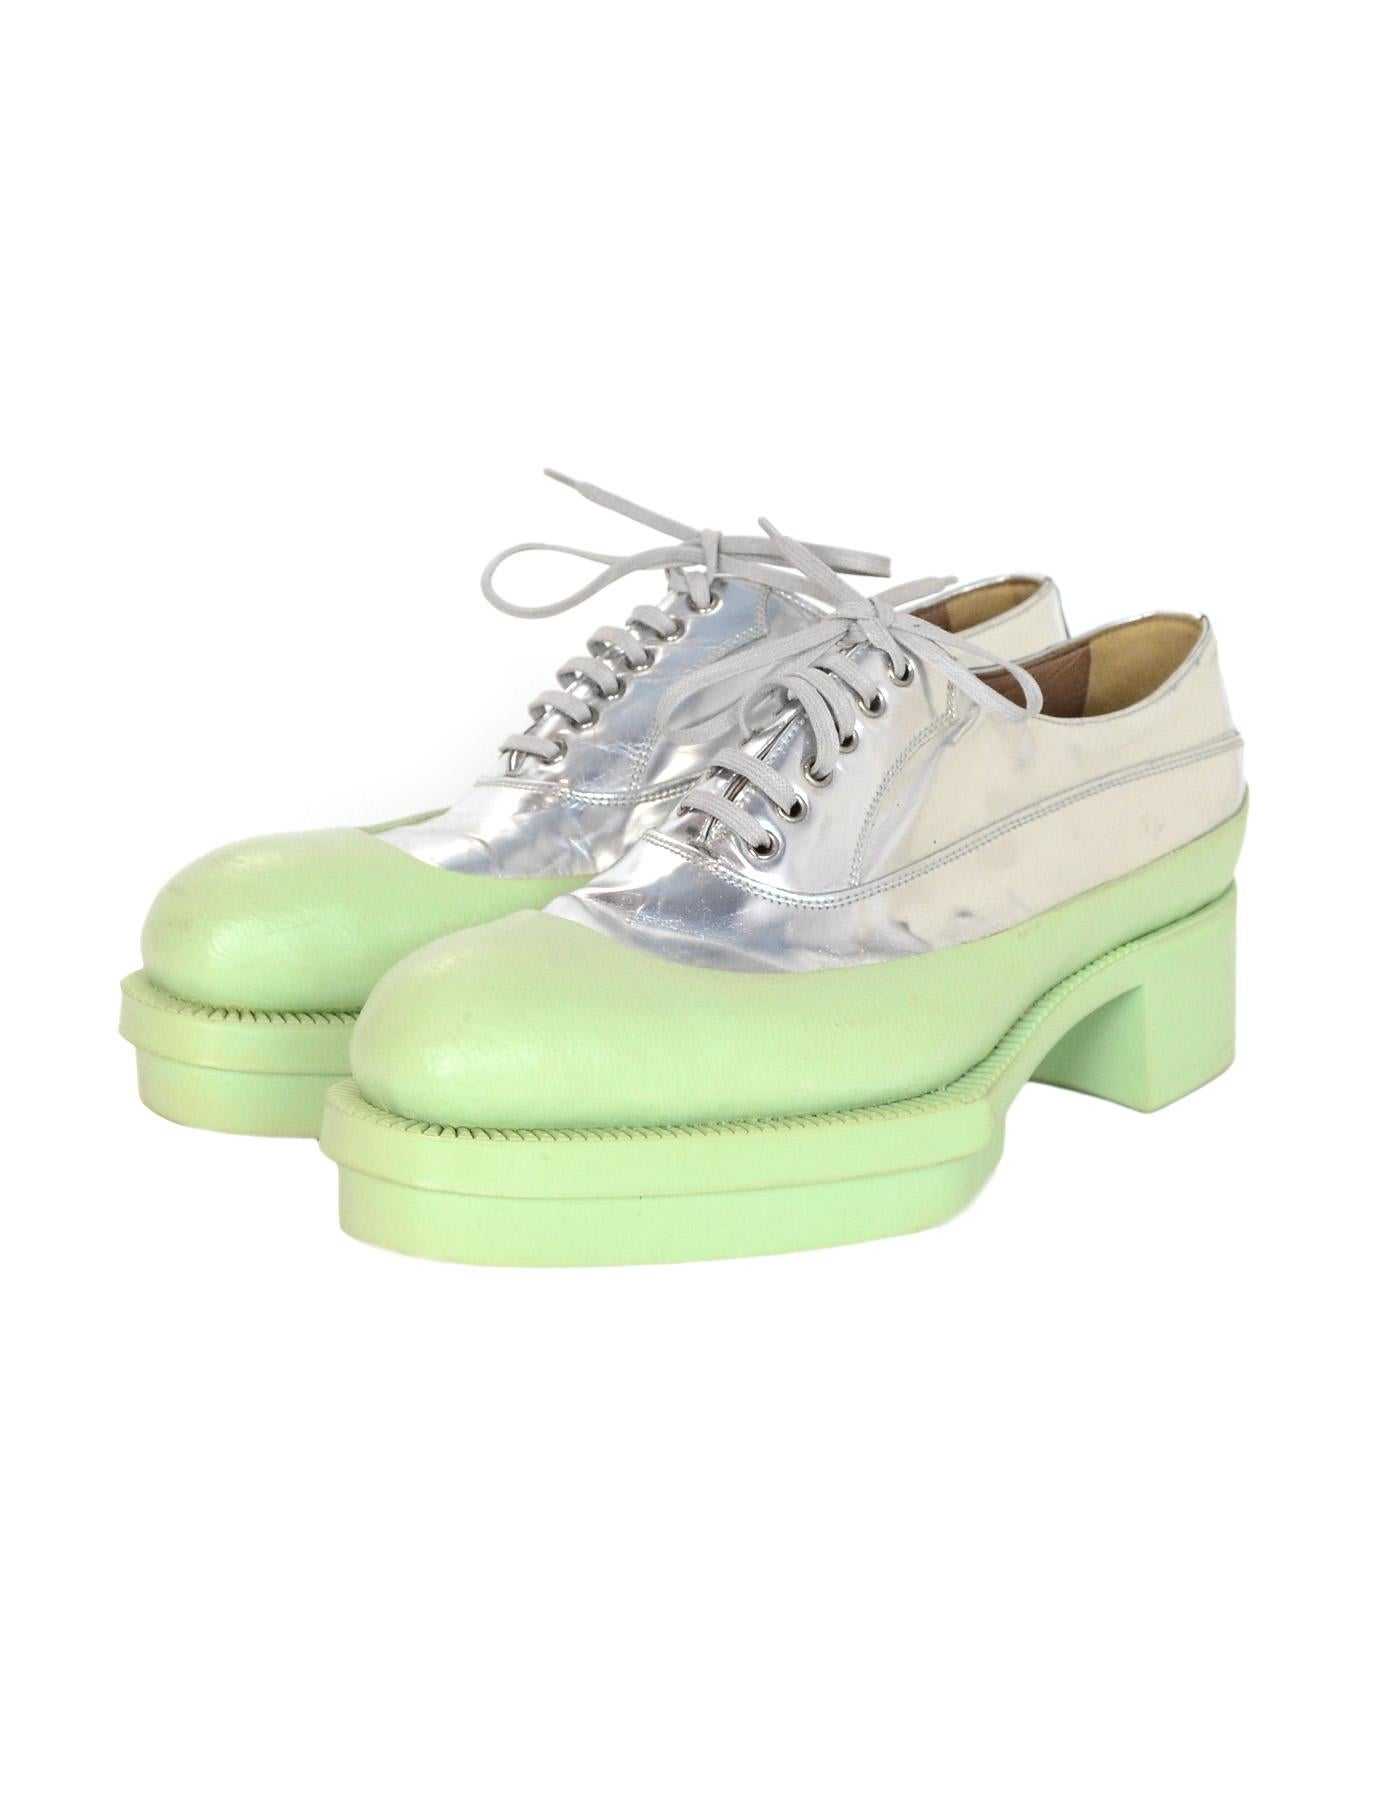 Prada Mint Green Metallic Silver Rubber & Leather Heeled Platform Lace Up Oxfords Sz 38.5

Made In: Italy
Color: Mint green and metallic silver
Hardware: Silvertone
Materials: Rubber and leather 
Closure/Opening: Lace up
Overall Condition: Excellent